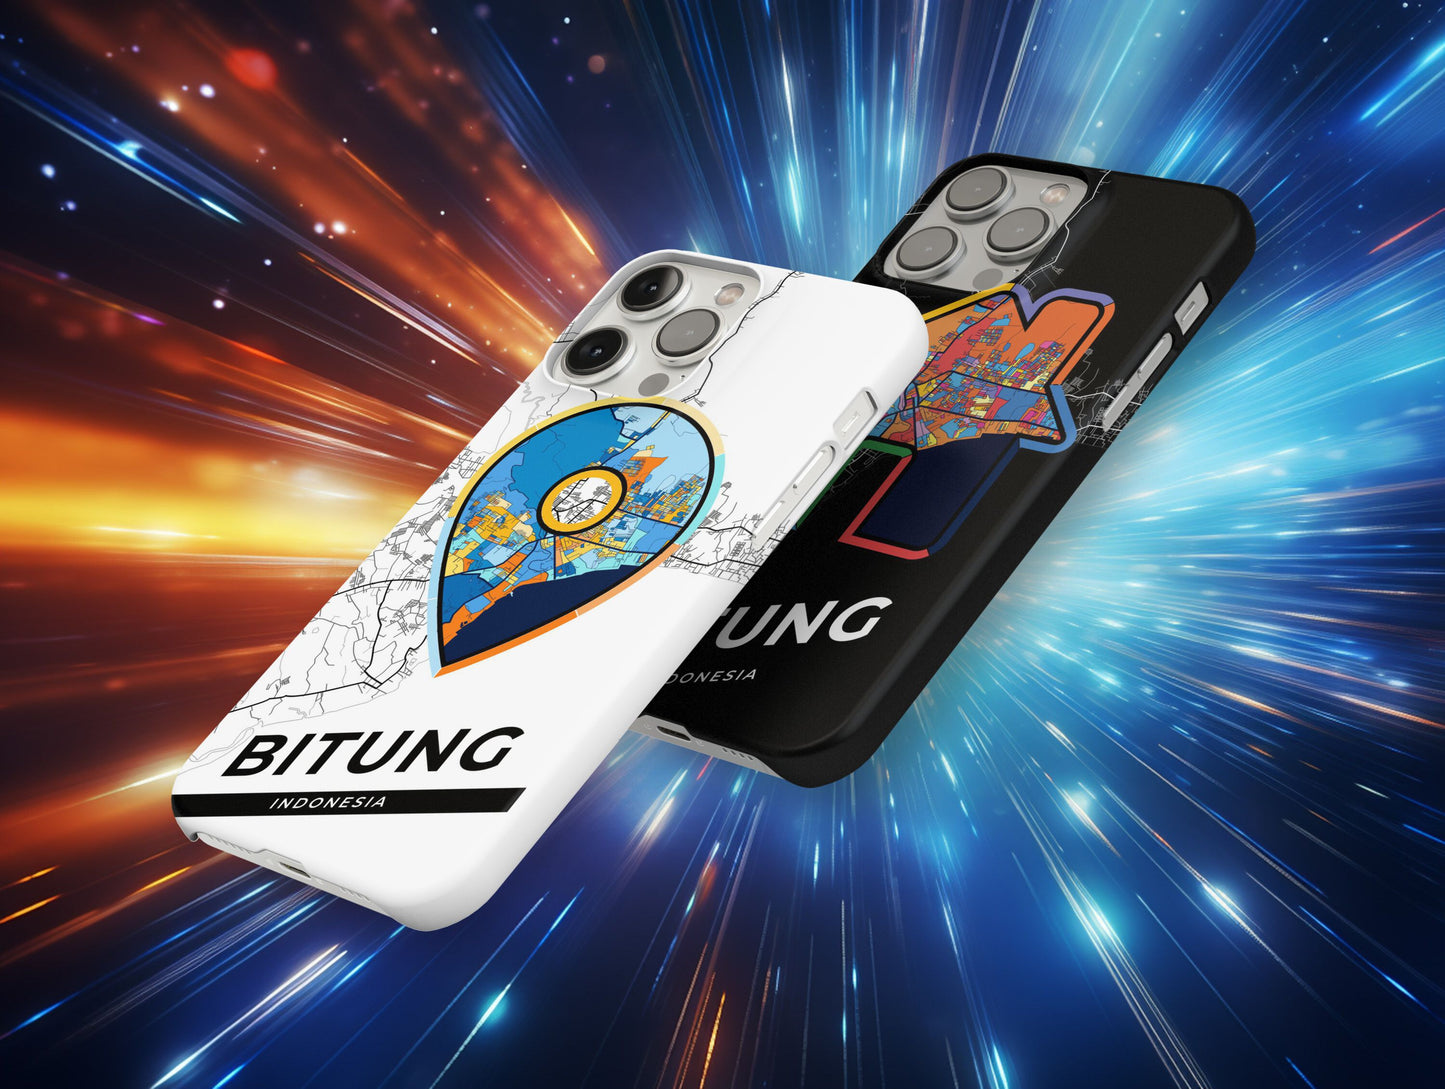 Bitung Indonesia slim phone case with colorful icon. Birthday, wedding or housewarming gift. Couple match cases.